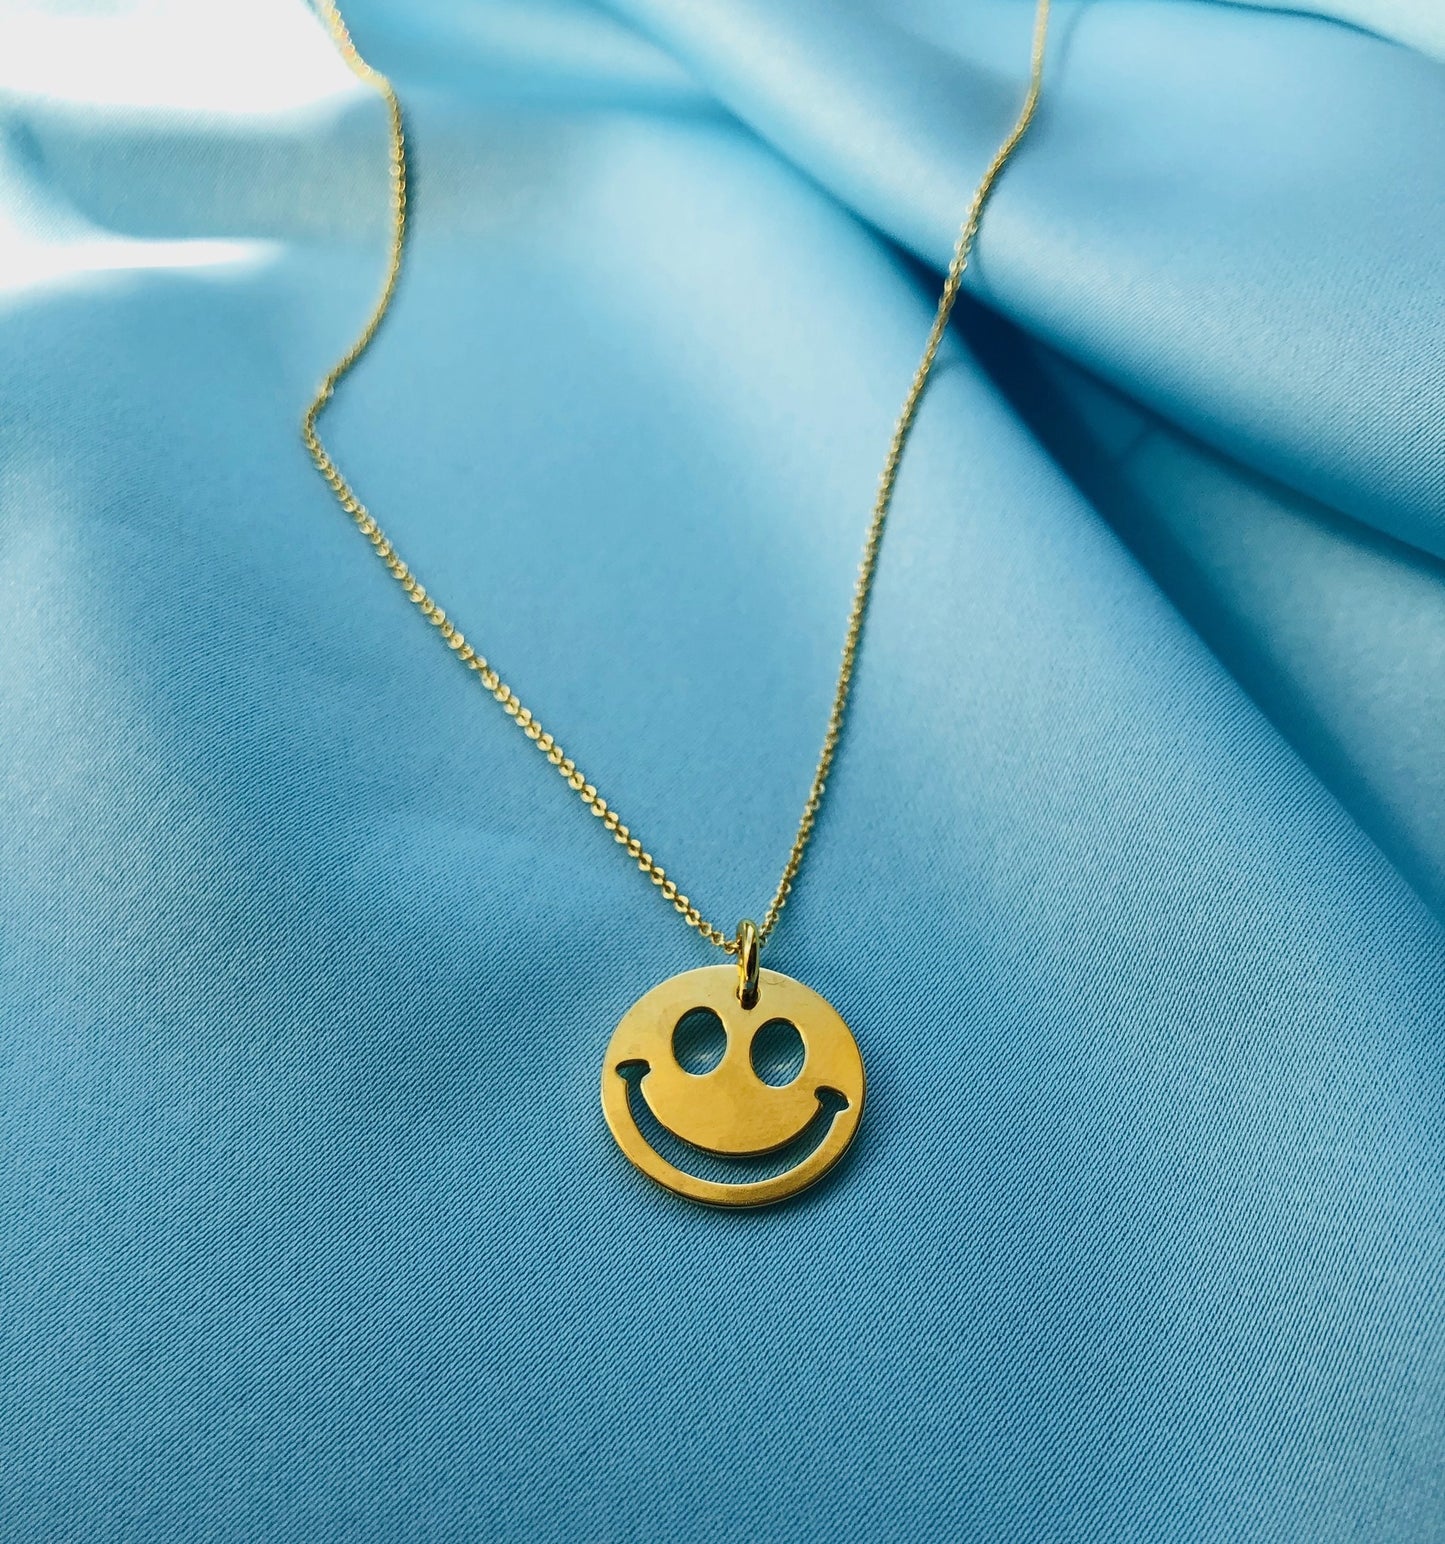 Introverted necklace